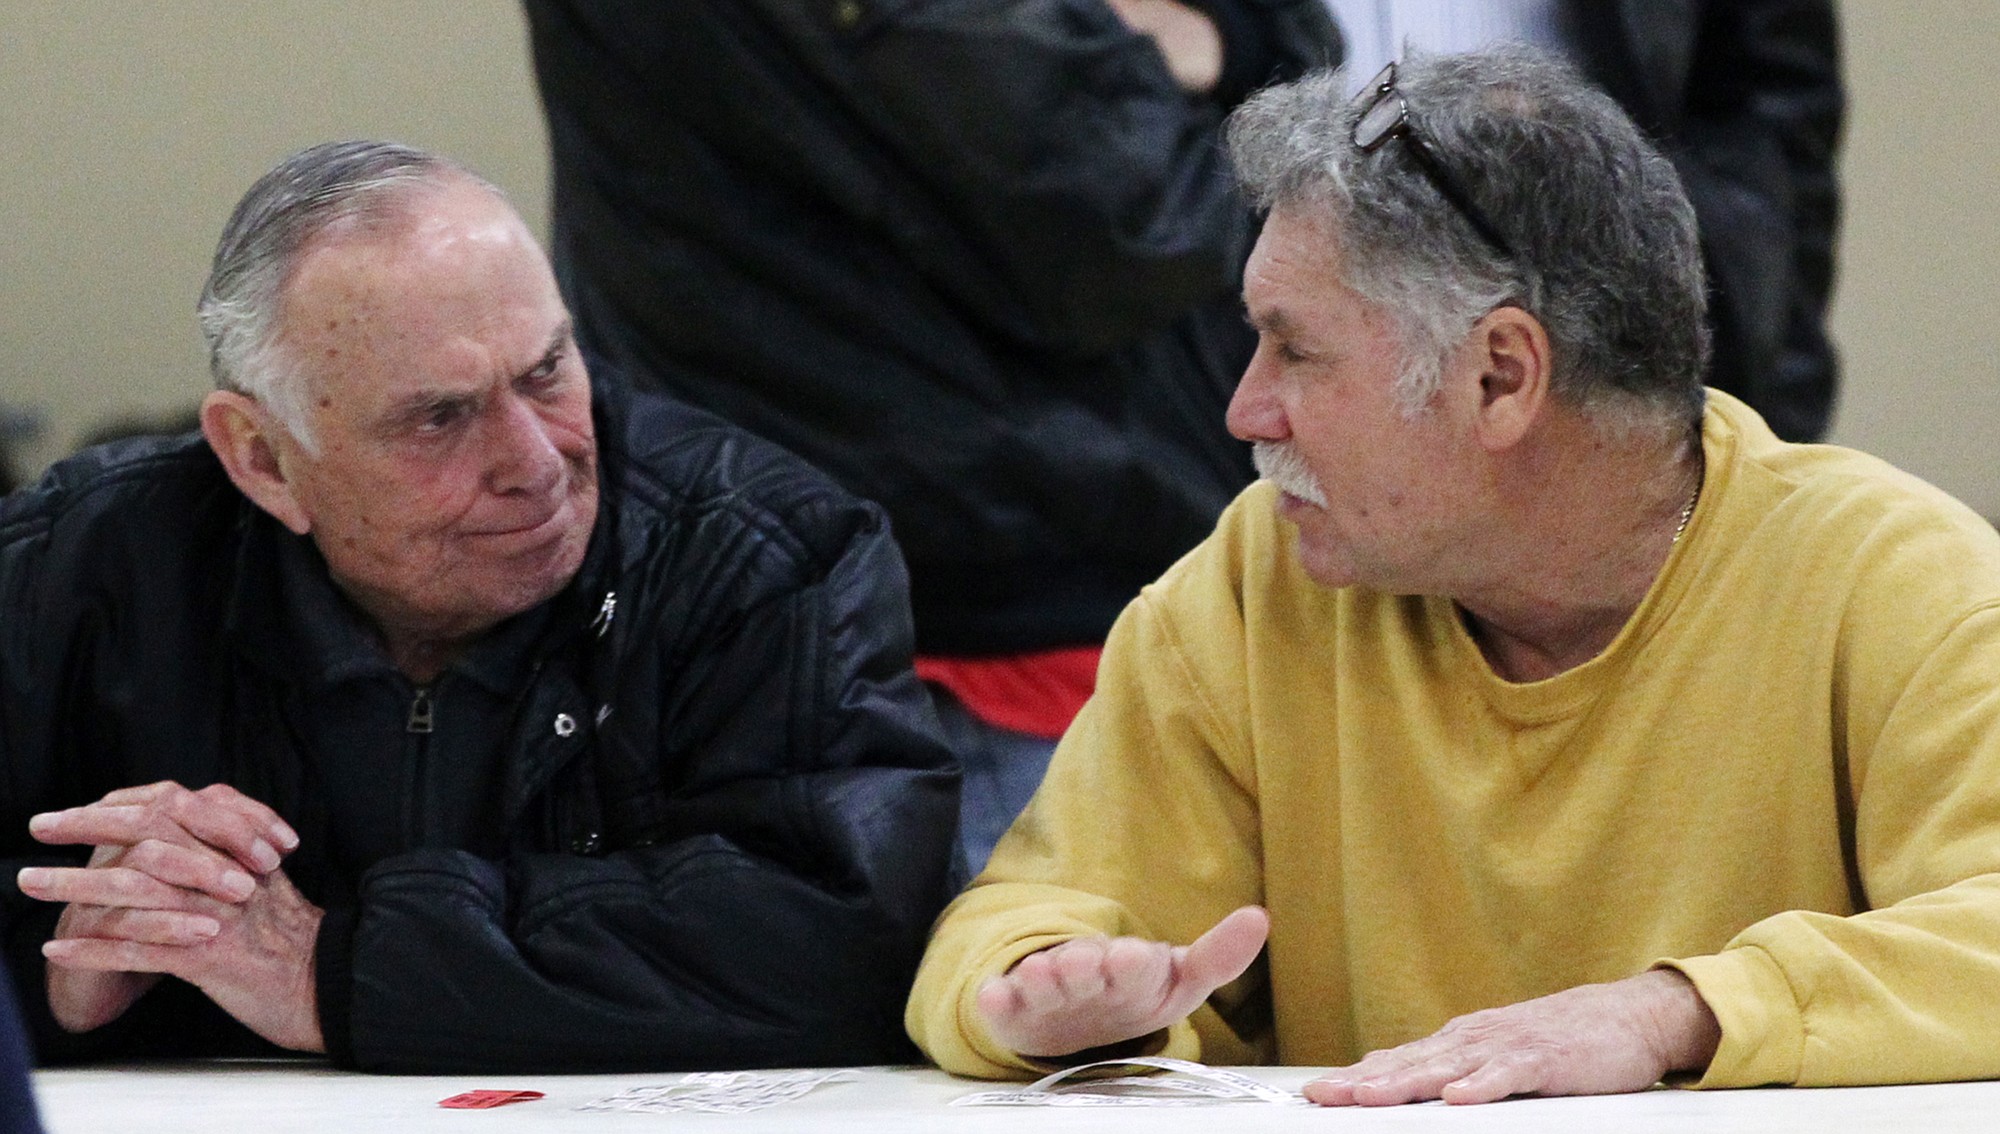 Consolidated Freight retirees Dick Meadows, 80, left, and Joe Mardula, 62, converse at a Retired Teamsters Fellowship Club meeting Feb.